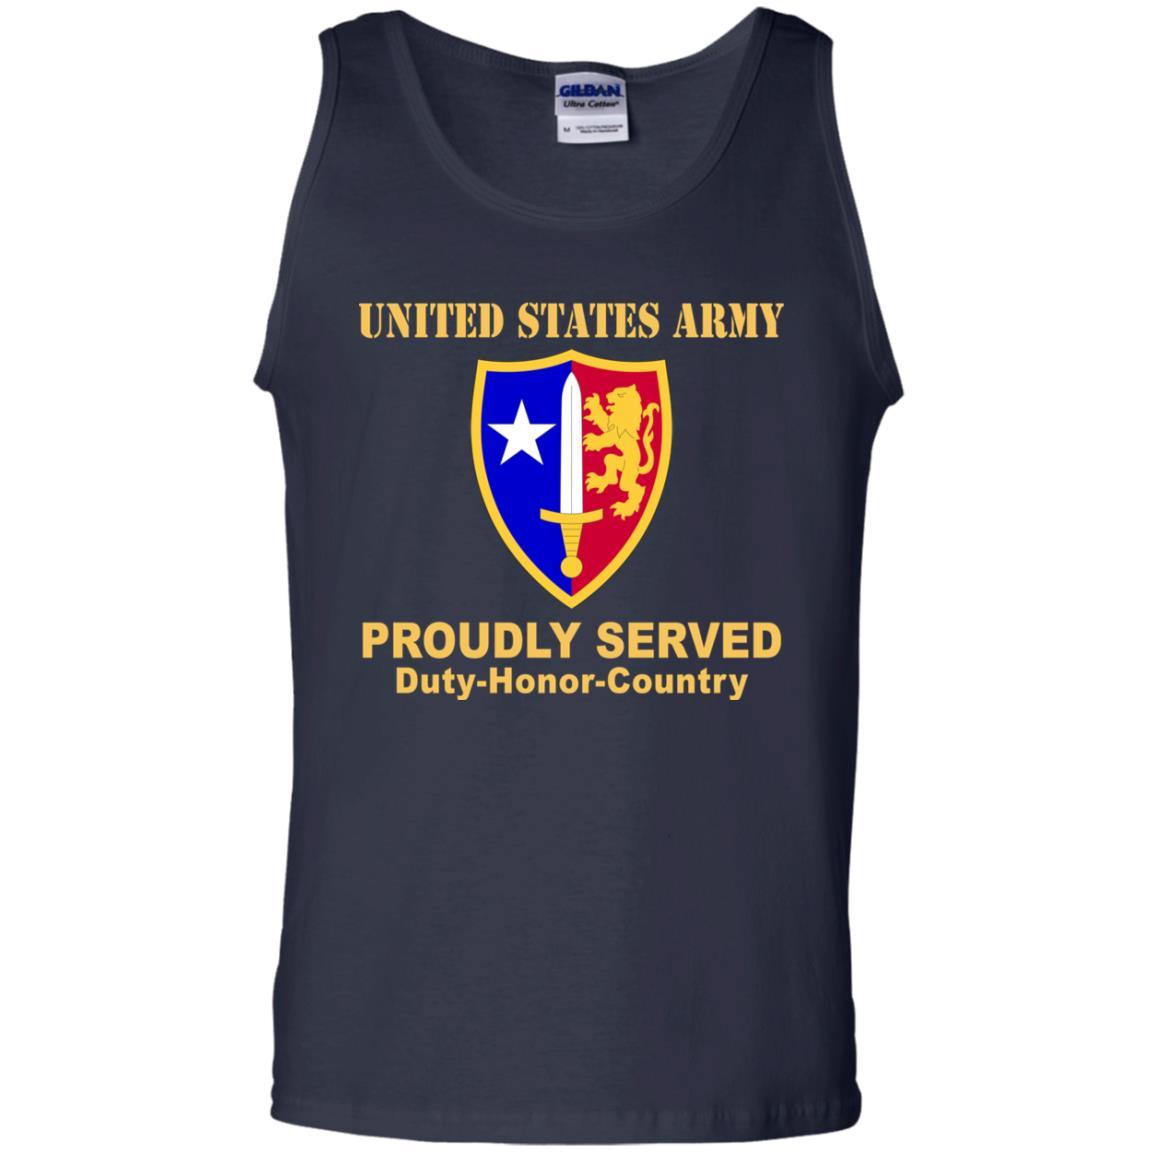 US ARMY USA NORTH ATLANTIC TREATY ORGANIZATION (NATO)- Proudly Served T-Shirt On Front For Men-TShirt-Army-Veterans Nation